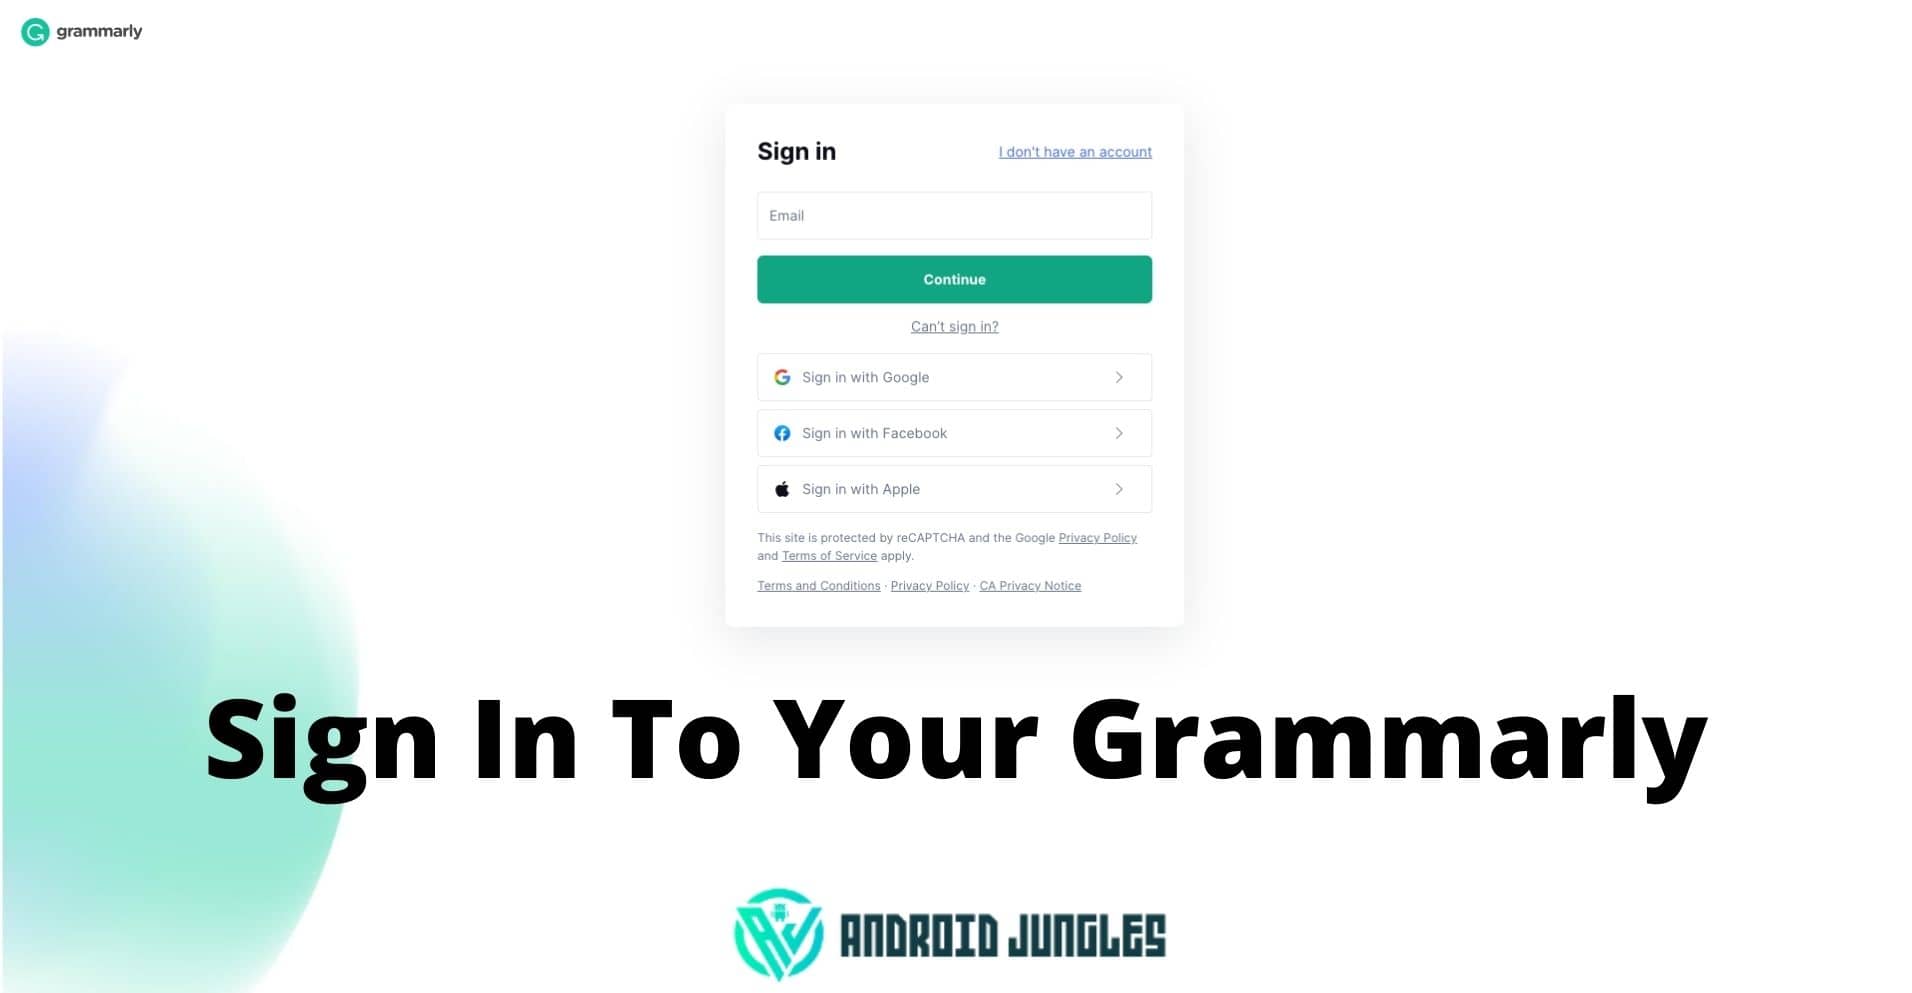 Sign in to grammarly